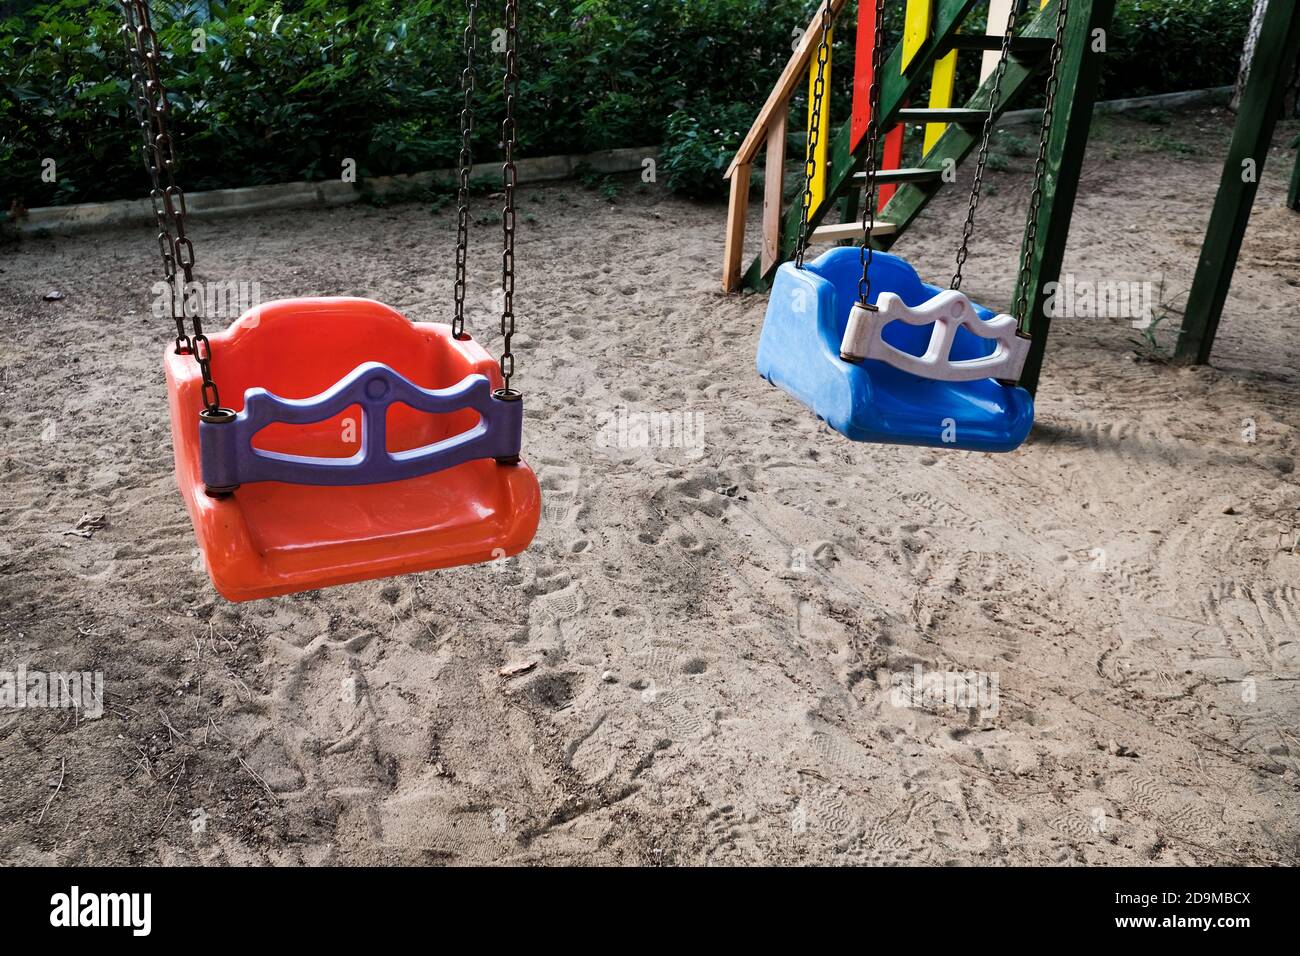 Empty swings on kindergarten playground. Unattended colorful swing set during coronavirus outbreak. Closed for children in pandemic. Nobody playing Stock Photo